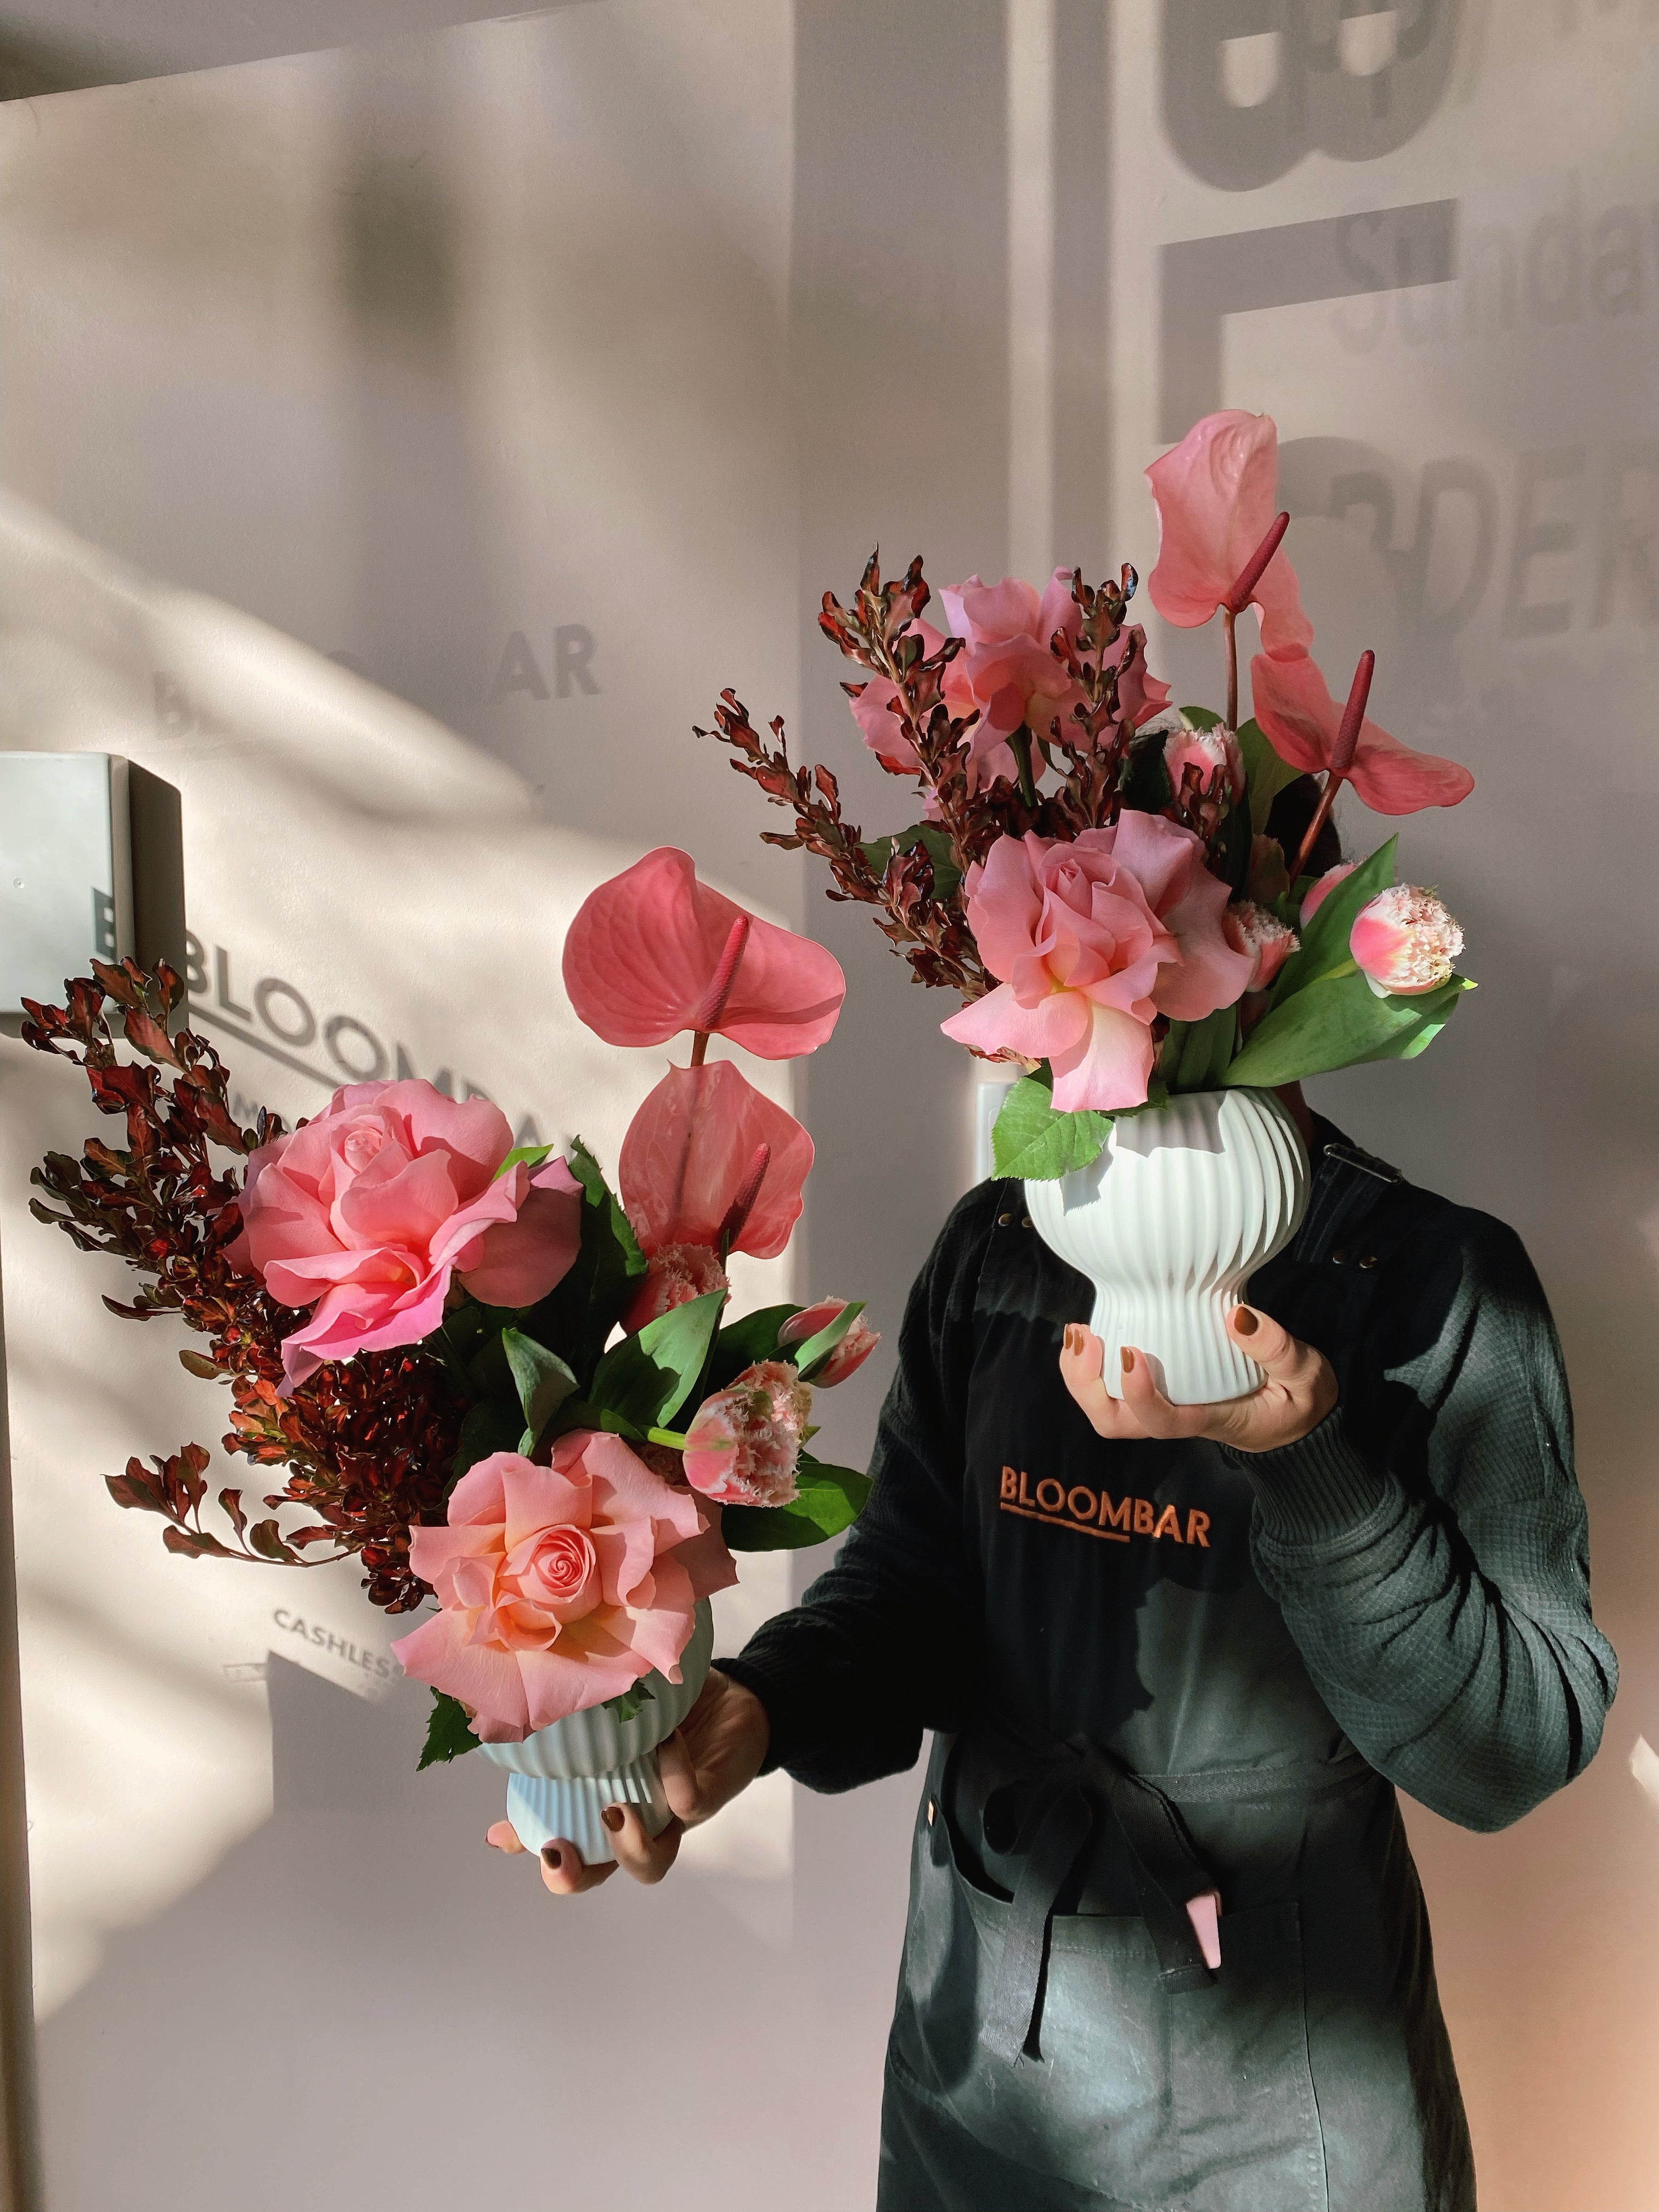 How To Say Thank You After Receiving Flowers – Bloombar Flowers